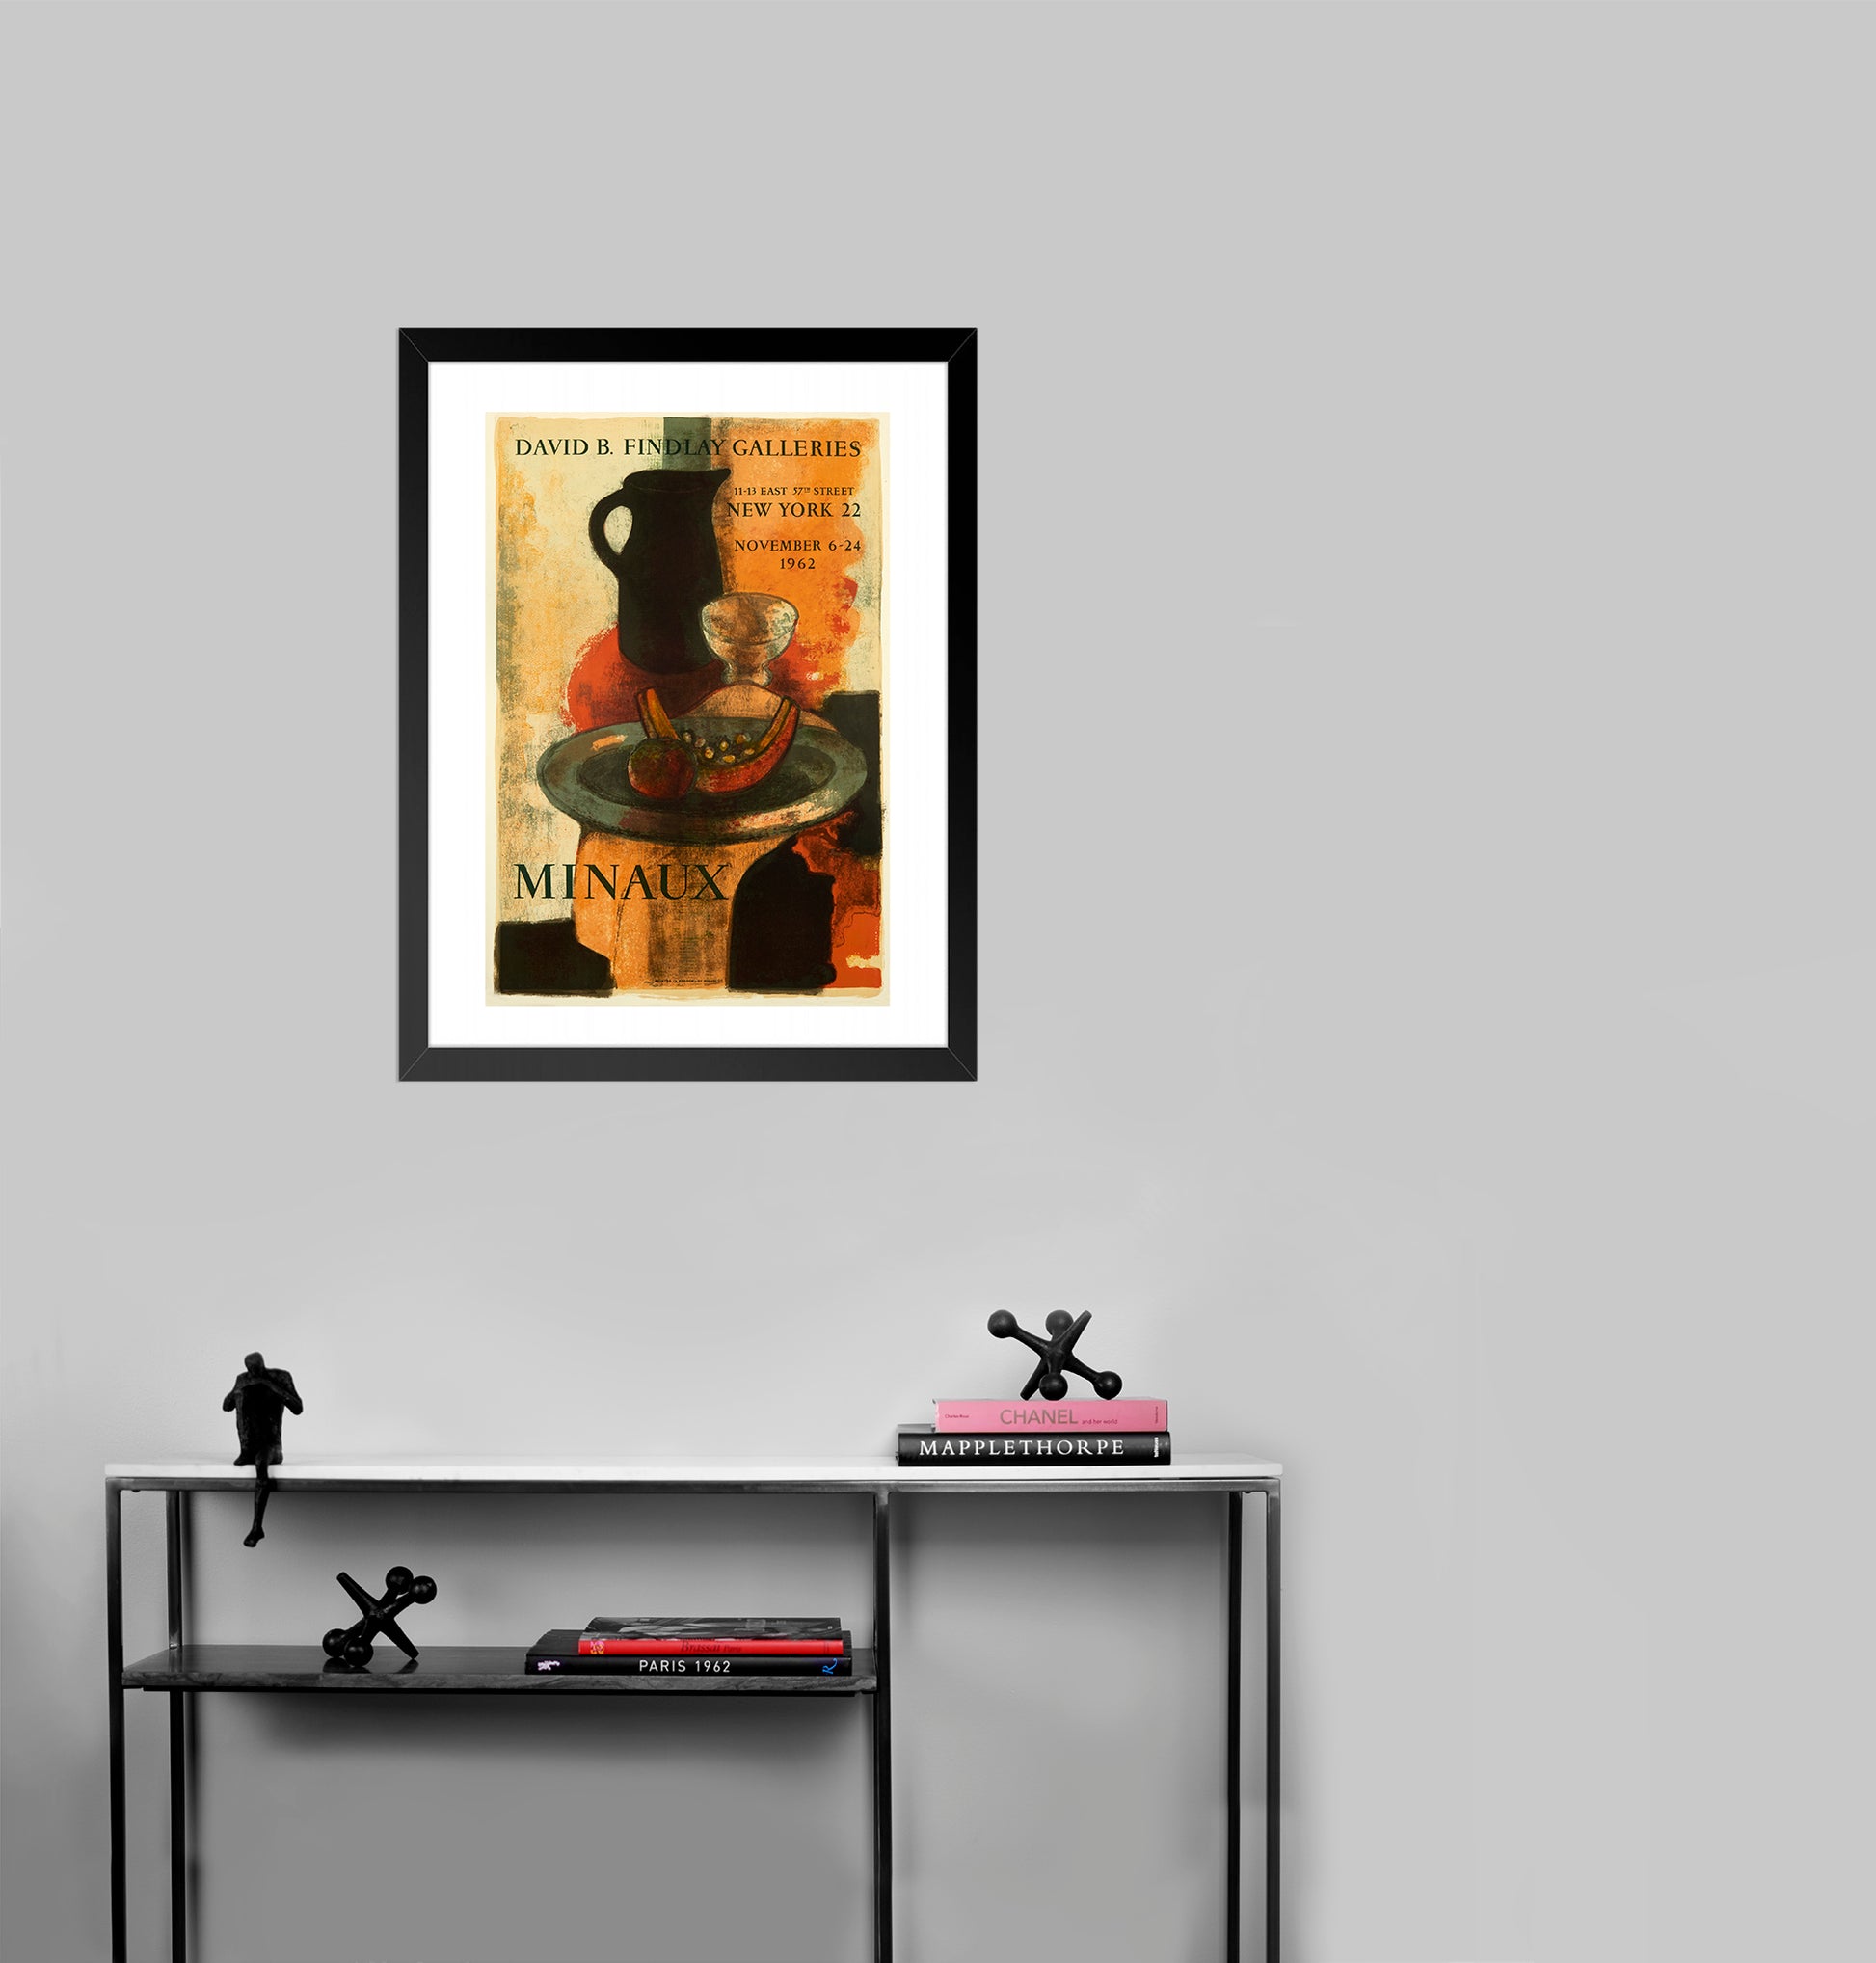 David B. Findlay Galleries by André Minaux - Mourlot Editions - Fine_Art - Poster - Lithograph - Wall Art - Vintage - Prints - Original